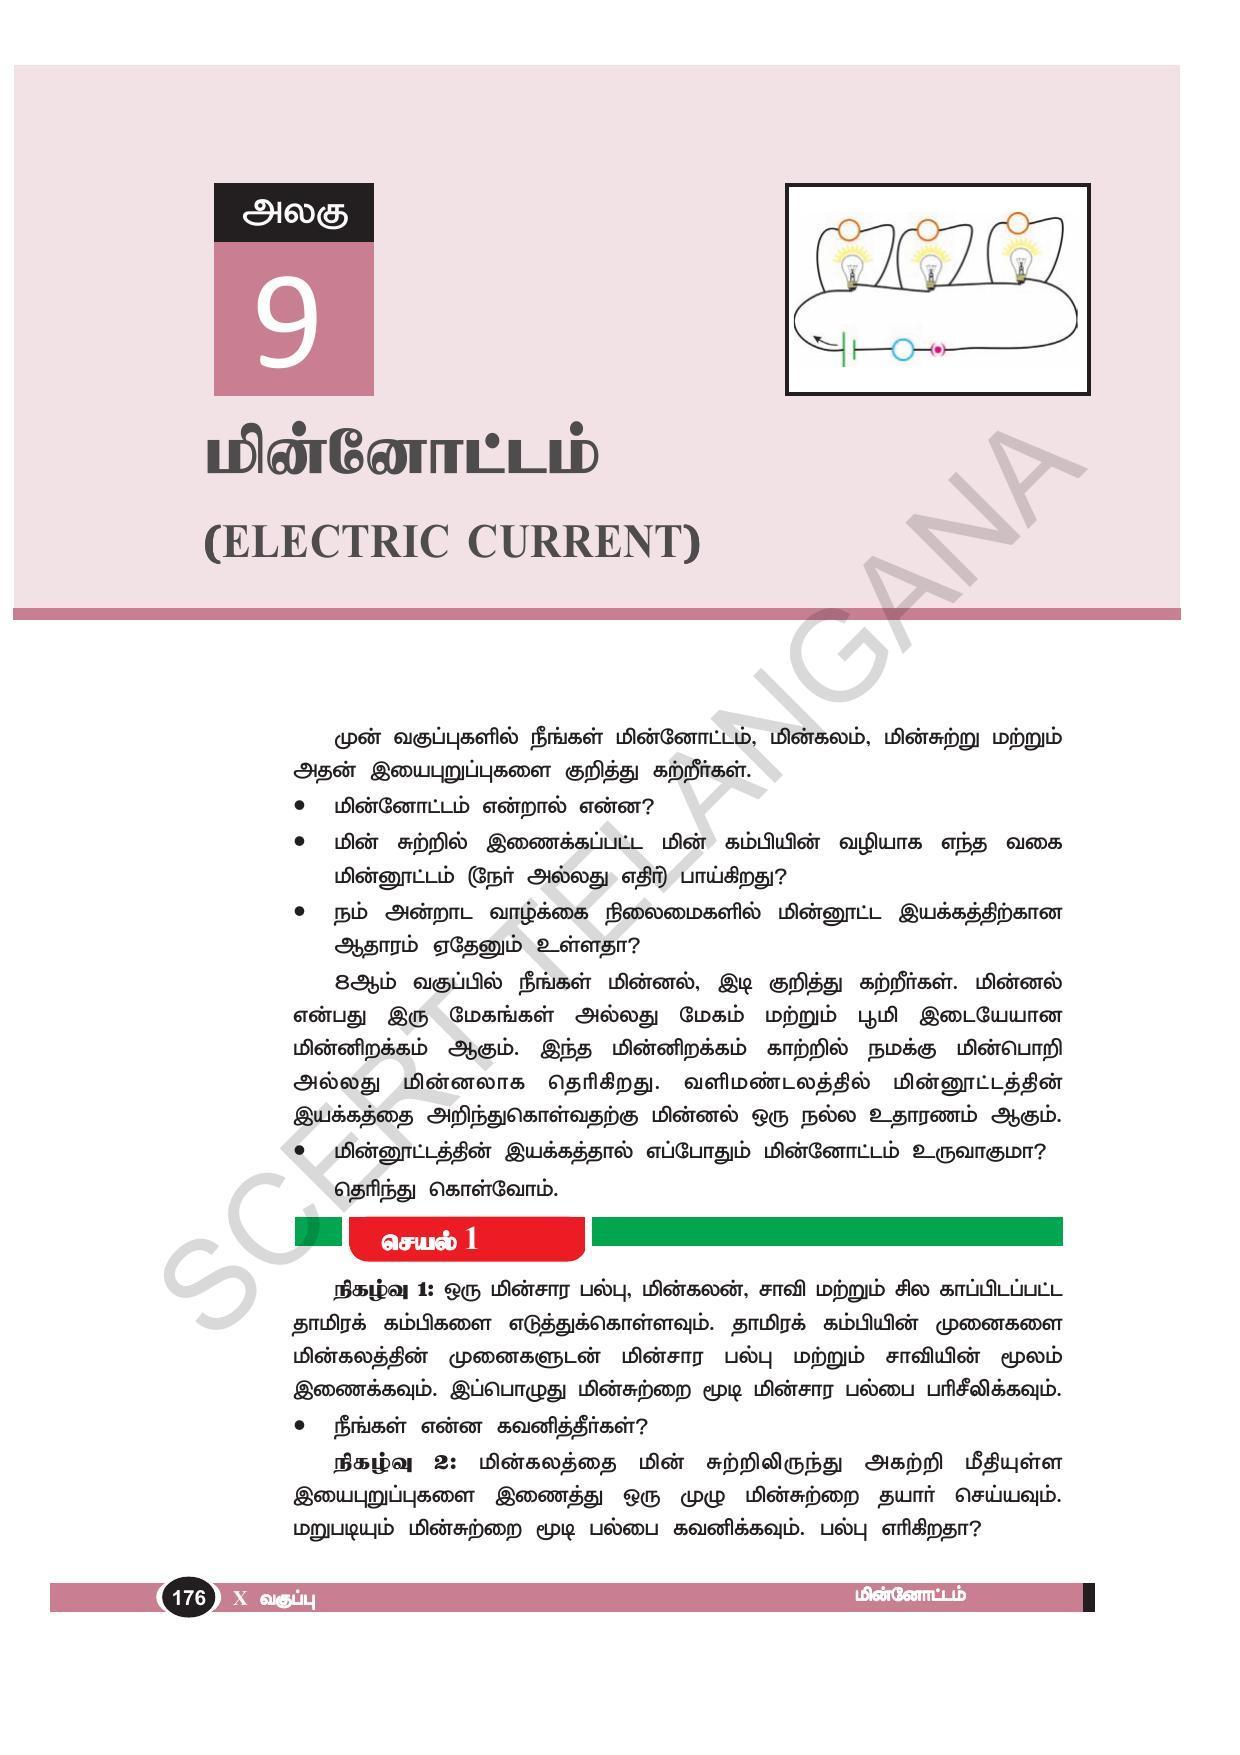 TS SCERT Class 10 Physical Science(Tamil Medium) Text Book - Page 188